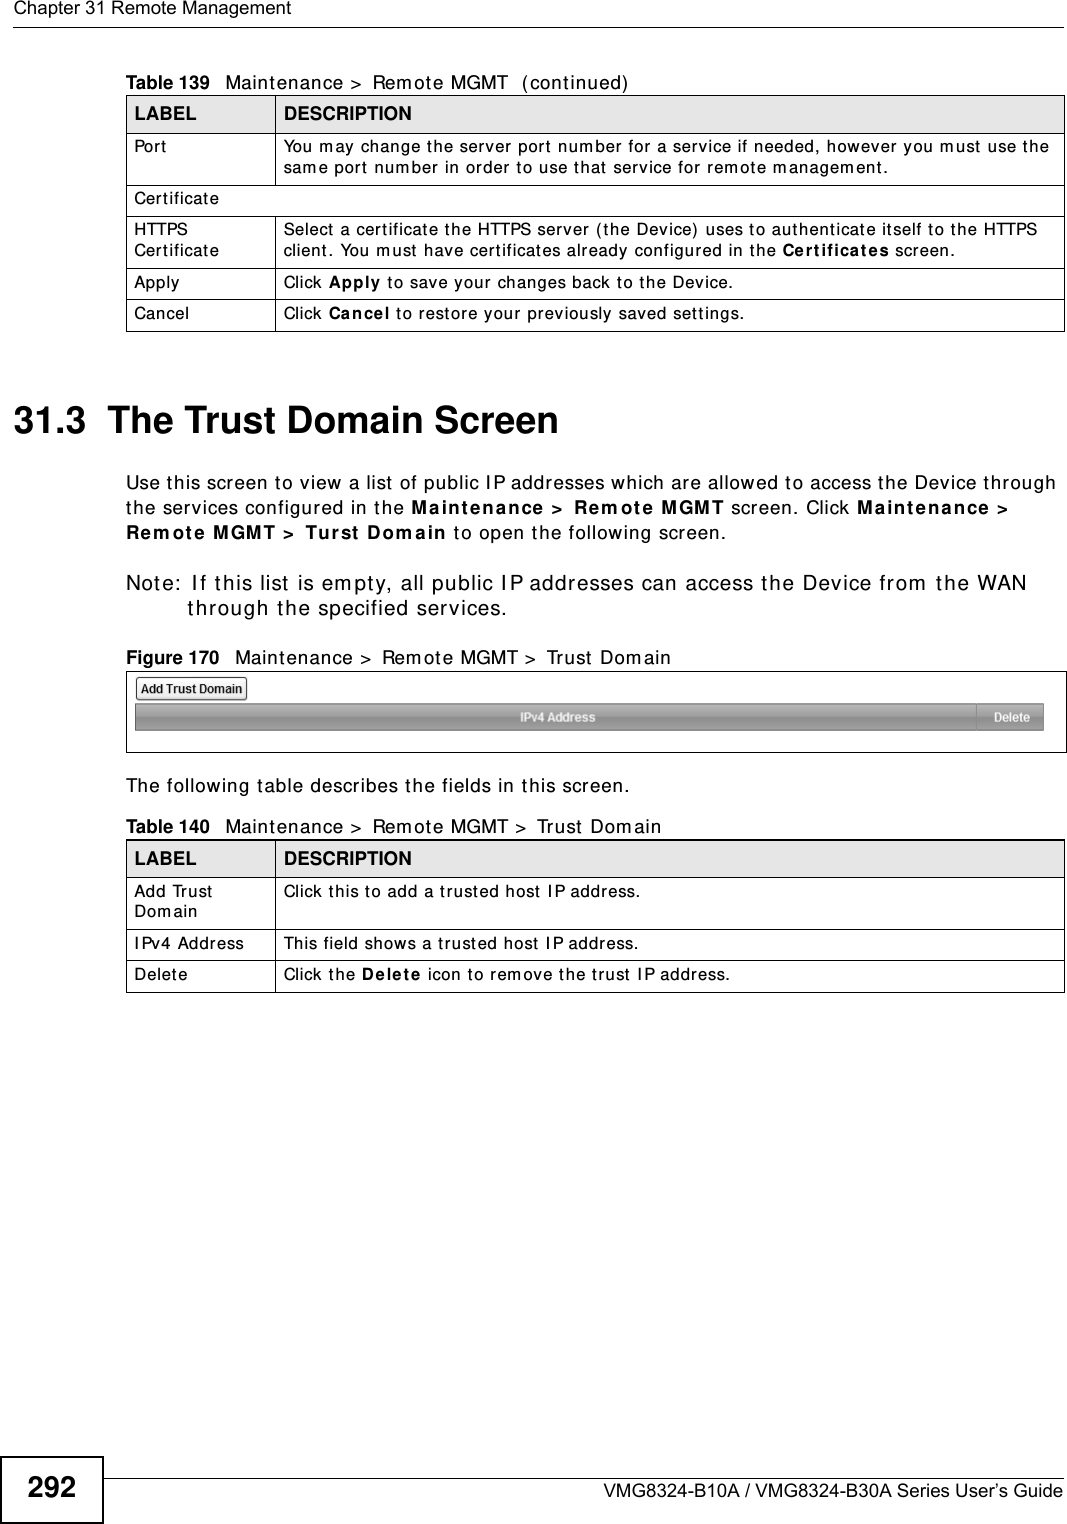 Chapter 31 Remote ManagementVMG8324-B10A / VMG8324-B30A Series User’s Guide29231.3  The Trust Domain ScreenUse t his screen t o view a list of public I P addresses which are allowed to access t he Device through the services configured in the M ainten ance &gt;  Re m ot e  M GM T screen. Click Ma int ena nce &gt;  Re m ote  MGM T &gt;  Turst  Dom ain  to open the following screen. Note:  I f this list is em pt y, all public I P addresses can access the Device from  the WAN through the specified services.Figure 170   Maintenance &gt;  Rem ot e MGMT &gt;  Trust  Dom ain The following t able describes the fields in this screen. Port You m ay change t he server port num ber for a service if needed, however you m ust use the sam e port  num ber in order t o use that  service for rem ot e managem ent.Certificat eHTTPS Certificat eSelect a certificat e the HTTPS server ( t he Device) uses to aut henticat e it self t o the HTTPS client. You m ust  have cert ificat es already configured in t he Ce r t if ica t e s screen.Apply Click Apply to save your changes back t o t he Device.Cancel Click Ca n cel t o restore your previously saved settings.Table 139   Maint enance &gt;  Rem ote MGMT  ( cont inued)LABEL DESCRIPTIONTable 140   Maint enance &gt;  Rem ote MGMT &gt;  Tr ust Dom ain LABEL DESCRIPTIONAdd Tr ust  Dom ainClick this t o add a trusted host  I P address.I Pv4 Address This field shows a trust ed host IP address.Delete Click t he De le t e  icon t o rem ove the t rust  I P address.